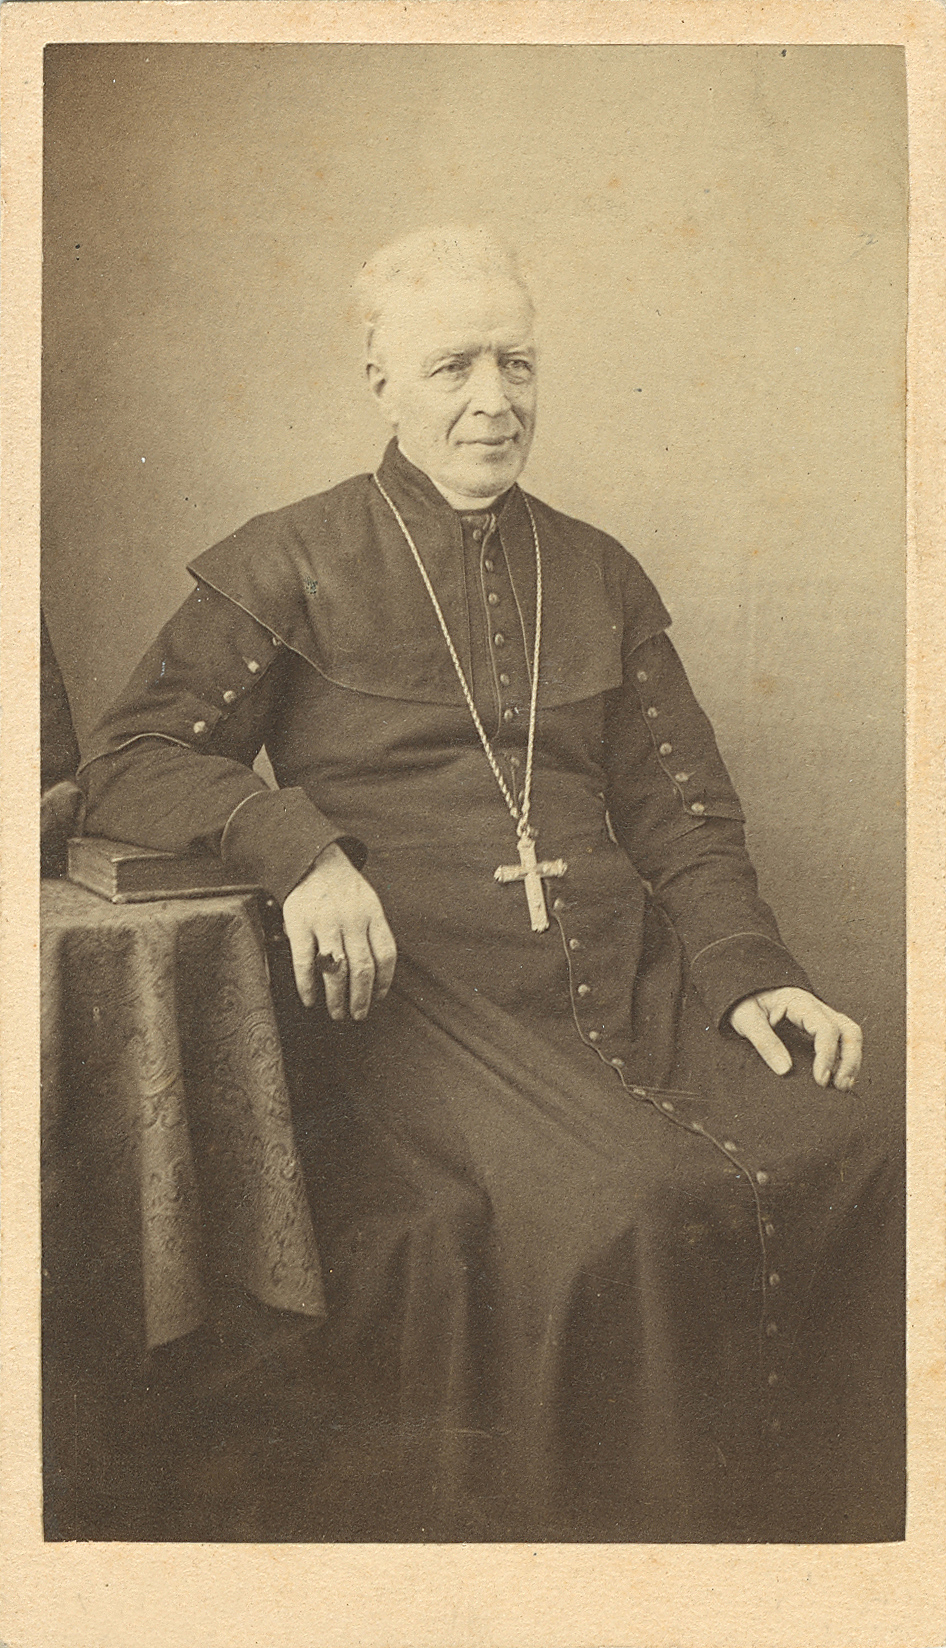 Sepia-tone photograph of a clergyman seated in a chair. He is elderly, with white hair. He wears a cassock, and a cross hangs from a long chain around his neck. His right hand rests on a table, with a ring visible on one finger.